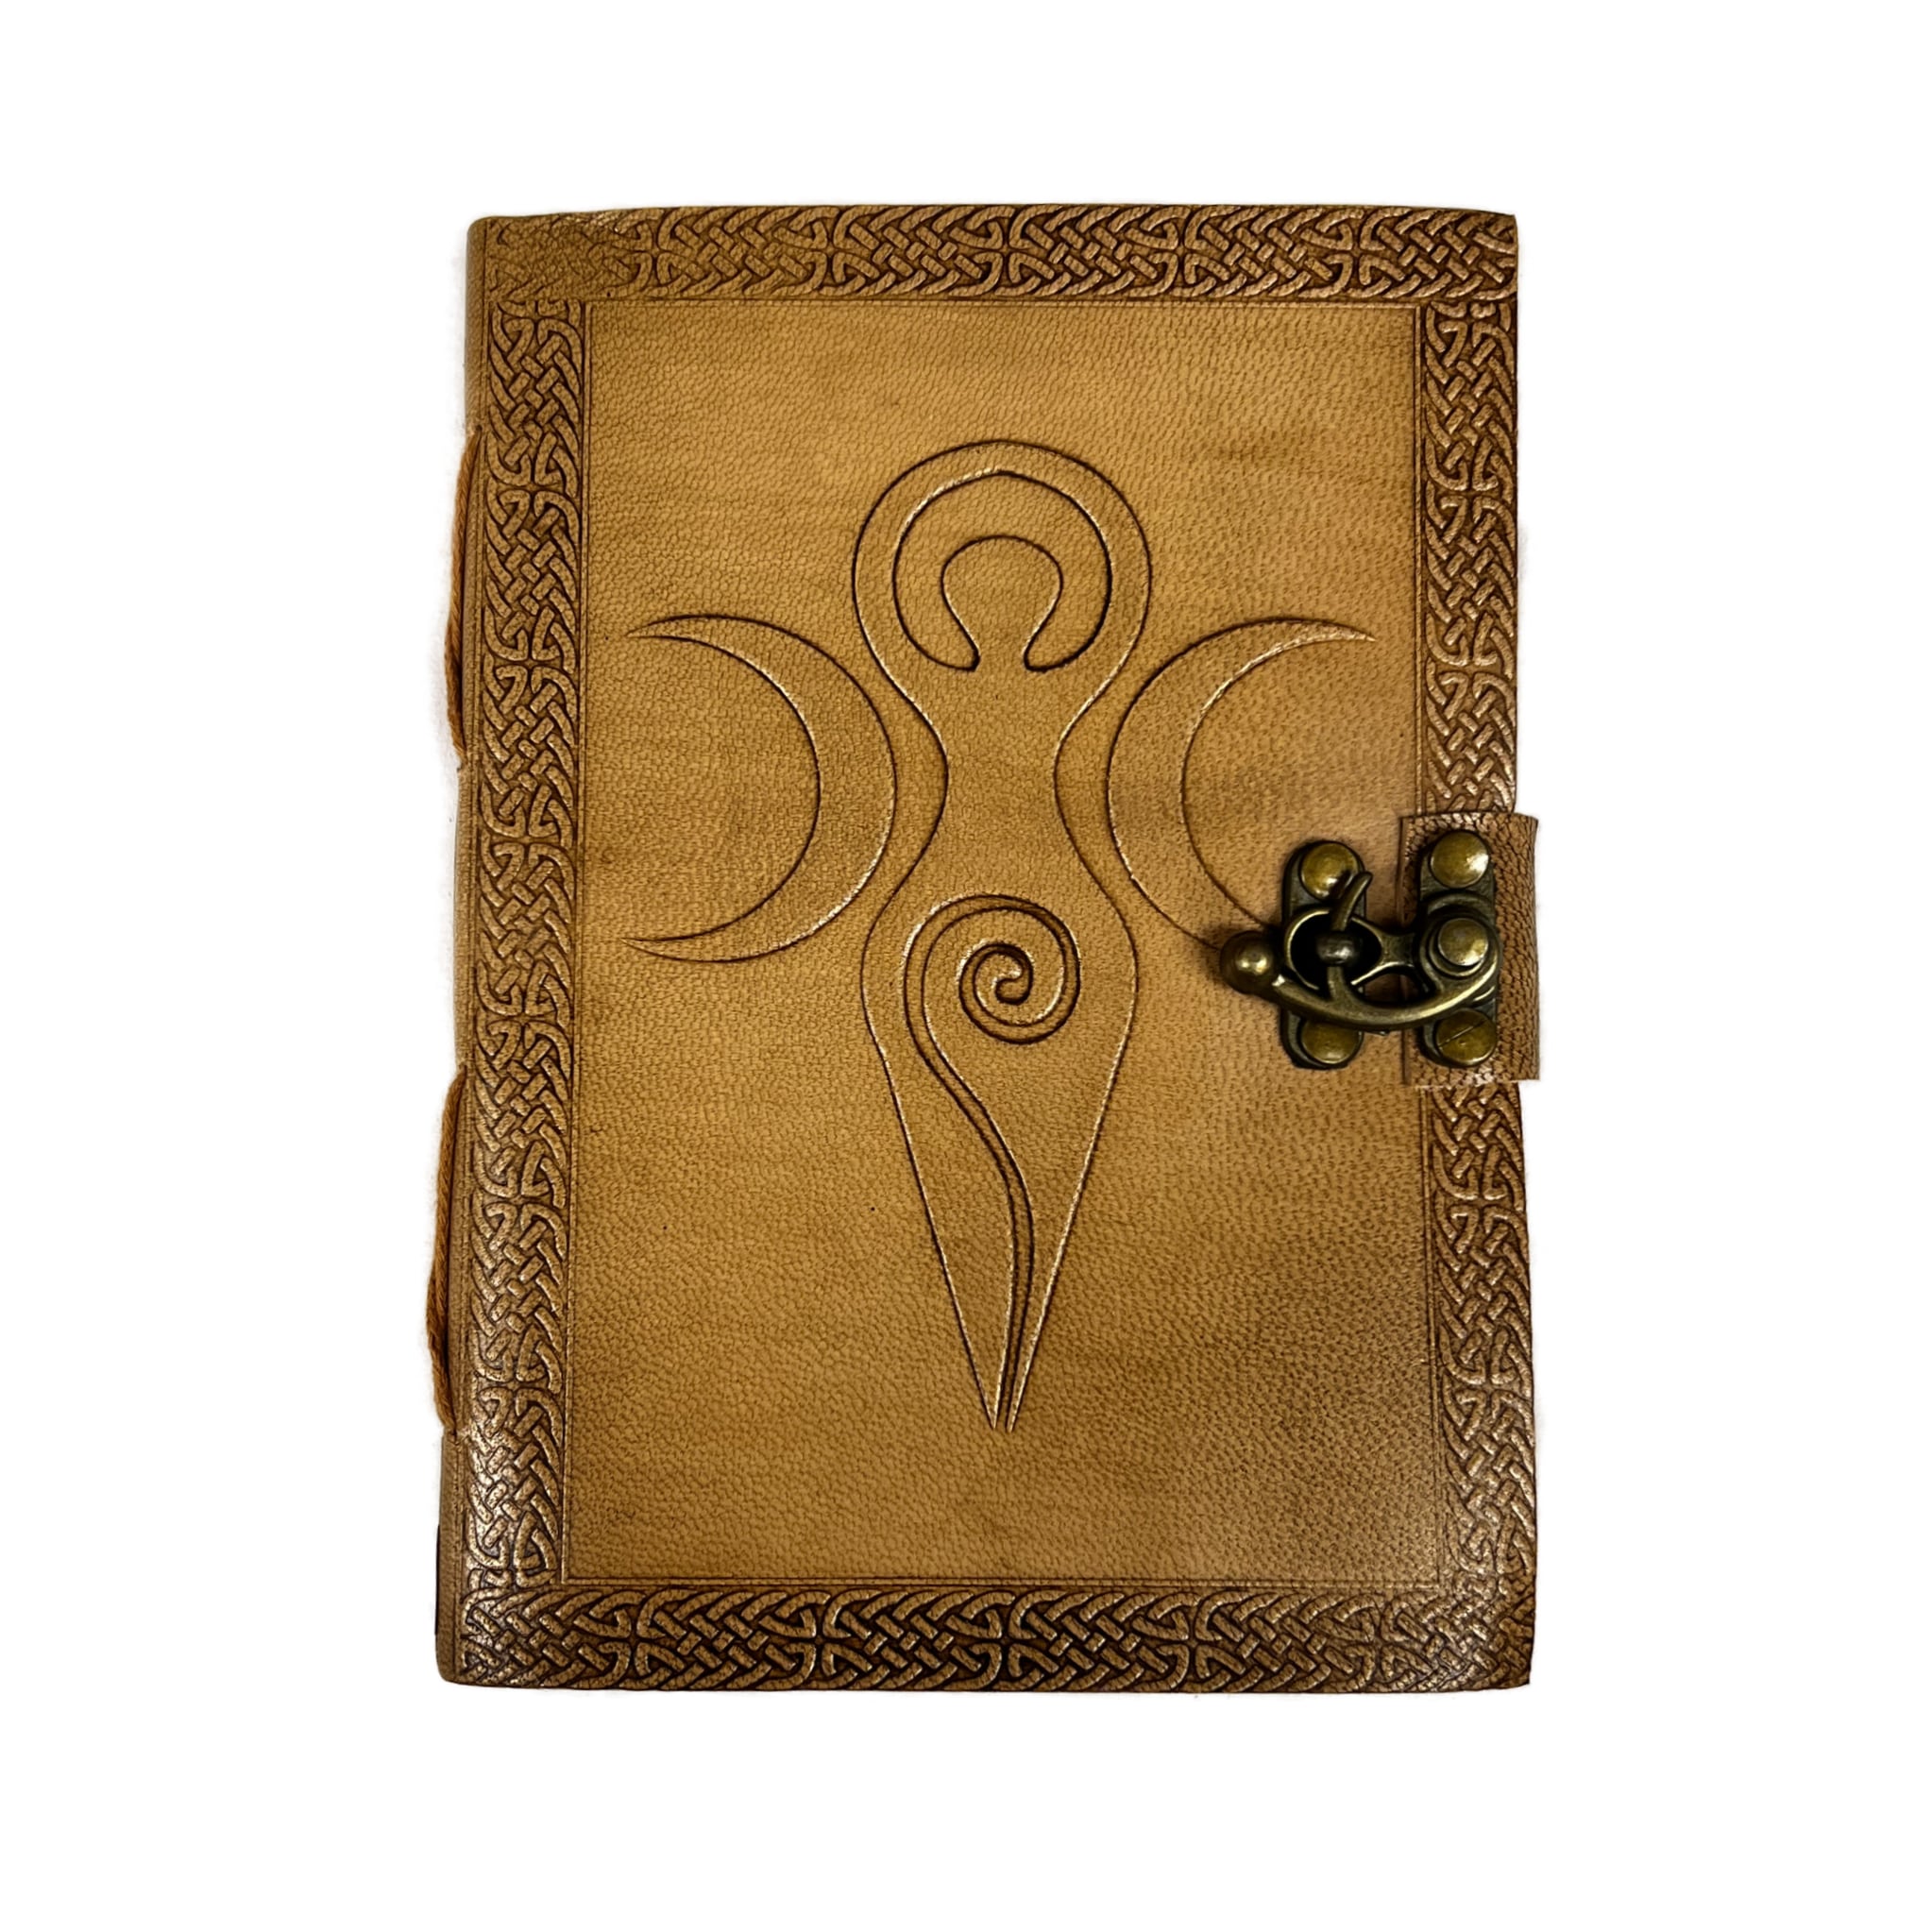 Light brown journal with image of goddess and moon 